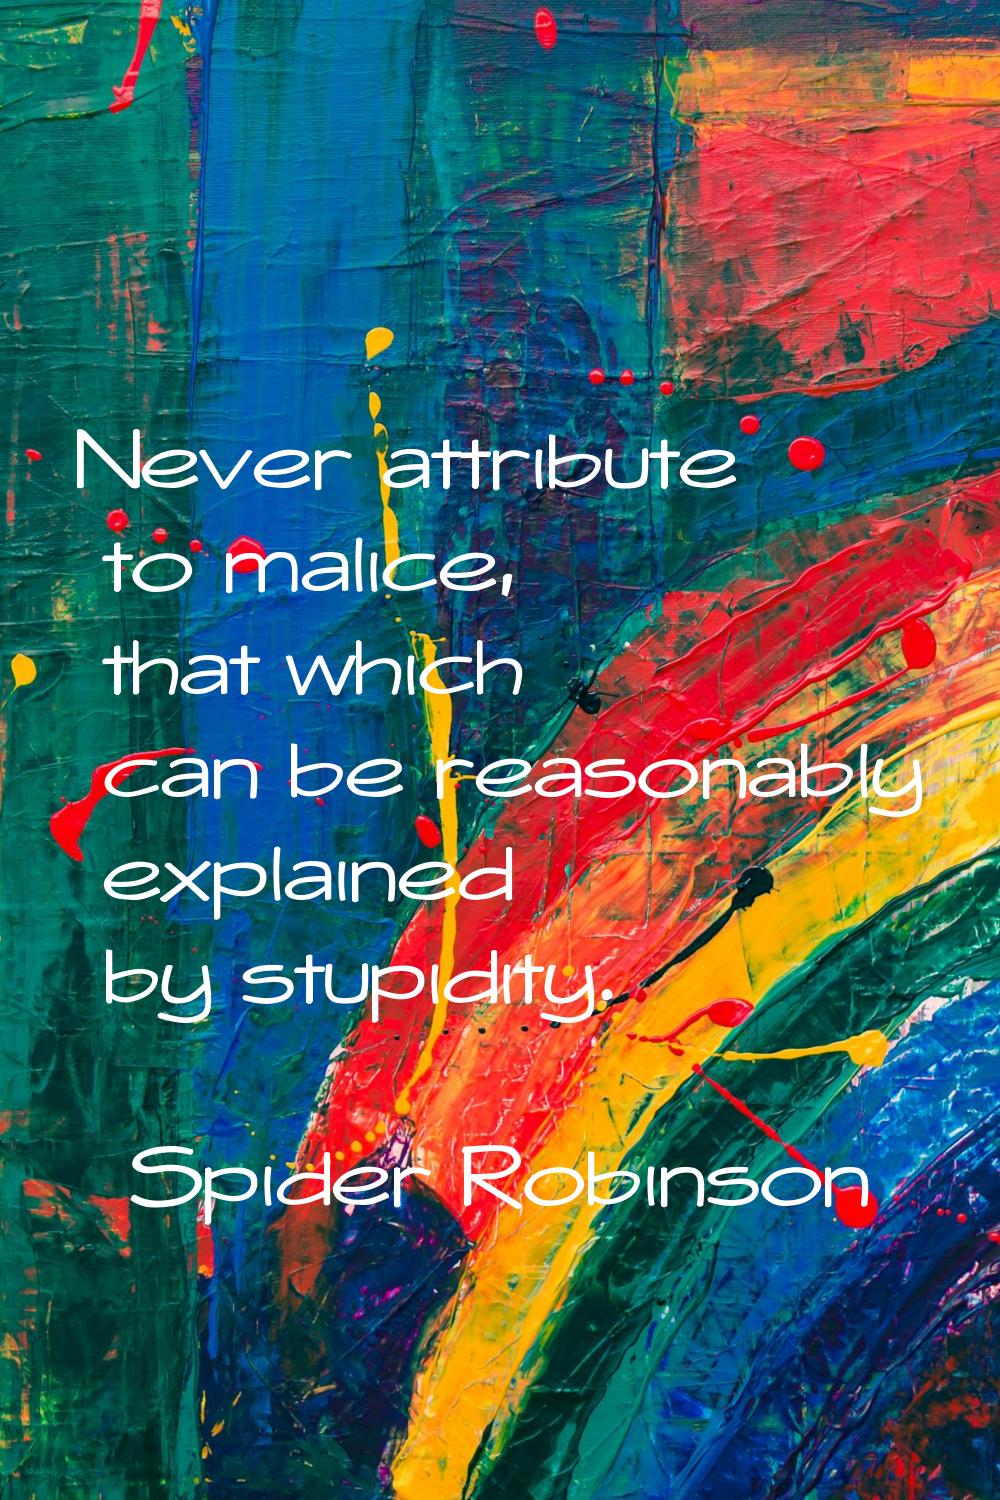 Never attribute to malice, that which can be reasonably explained by stupidity.